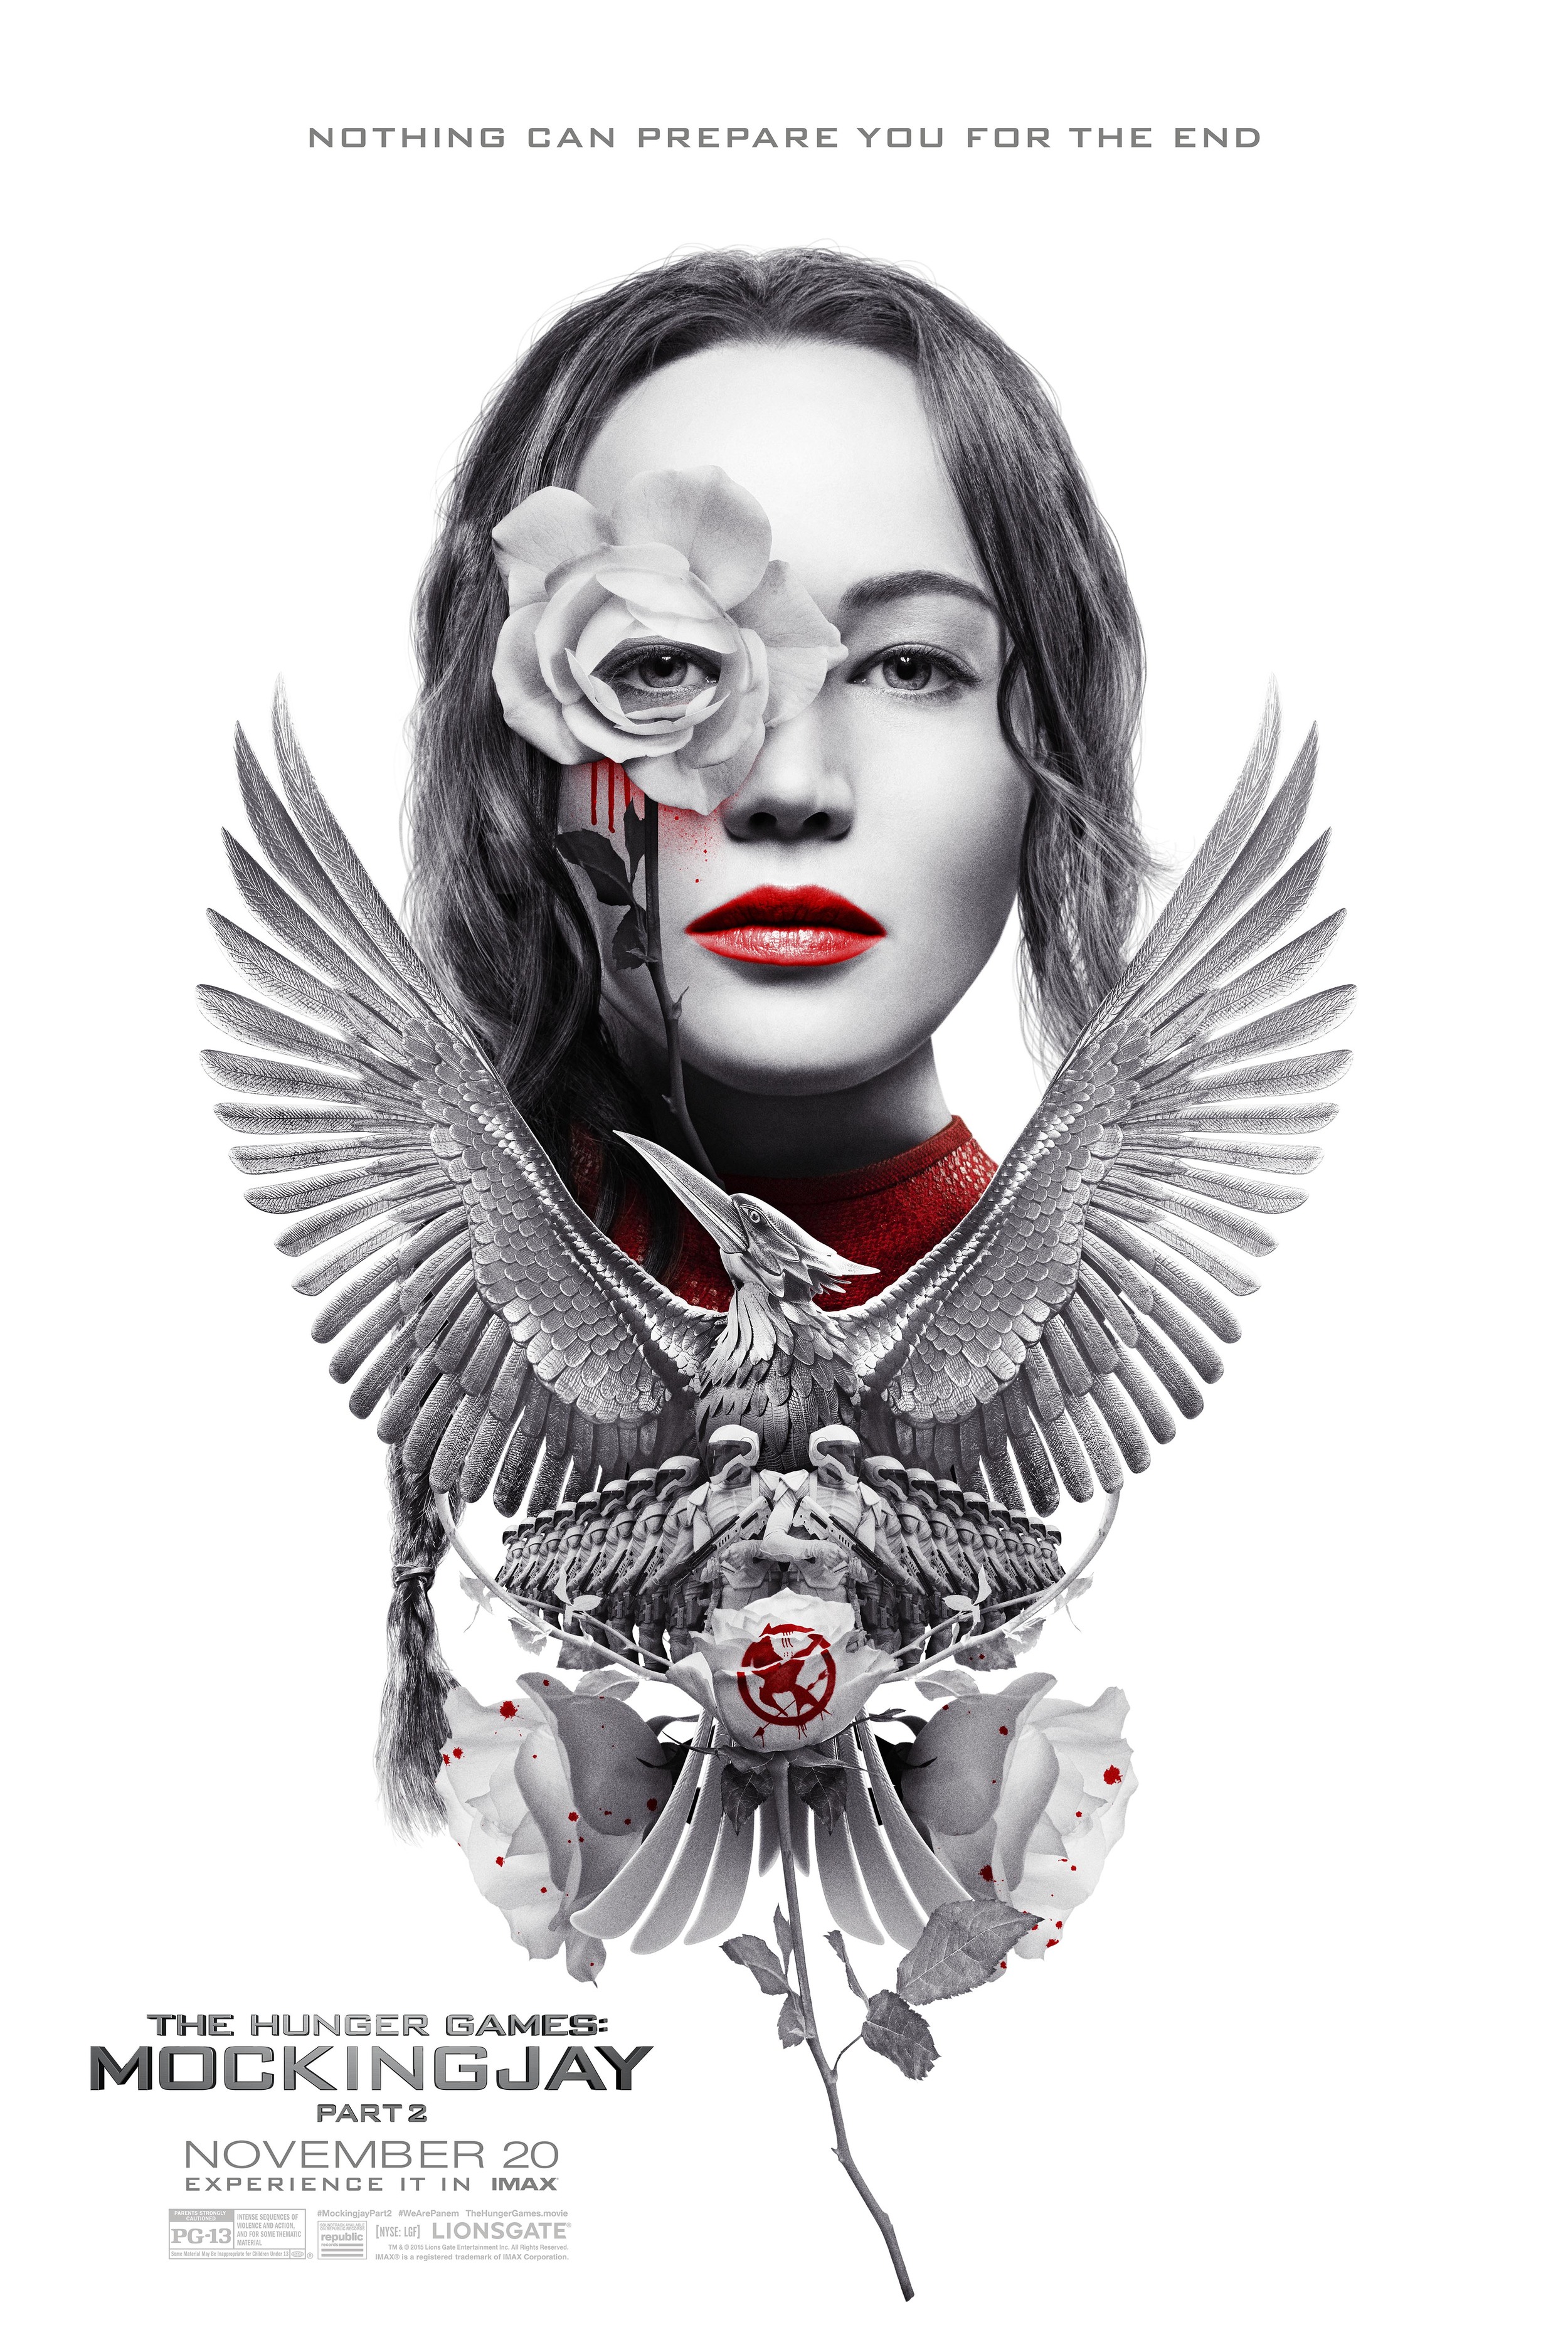 Picture from www.wire.com | The official poster for "Mockingjay Part 2" in IMAX